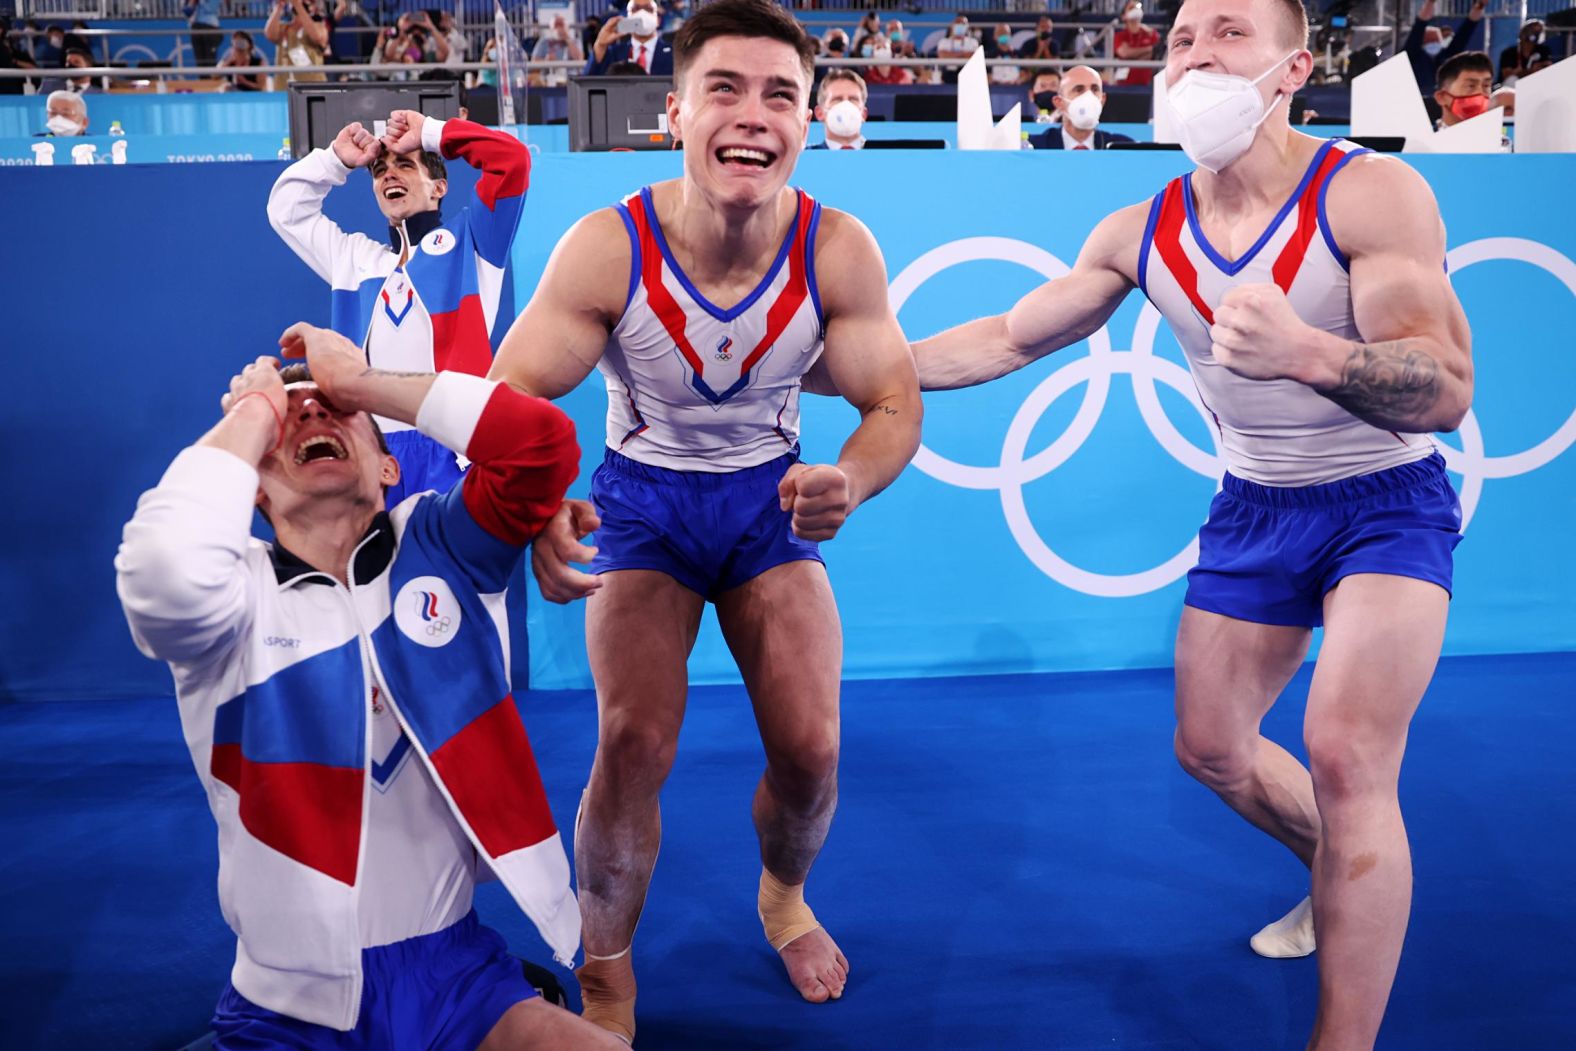 From left, Russian gymnasts David Belyavskiy, Artur Dalaloyan, Nikita Nagornyy and Denis Ablyazin react after <a href="index.php?page=&url=https%3A%2F%2Fwww.cnn.com%2Fworld%2Flive-news%2Ftokyo-2020-olympics-07-26-21-spt%2Fh_f0e07d44e4025e1ec45ea08b3ff18719" target="_blank">winning gold in the team all-around</a> on Monday, July 26.